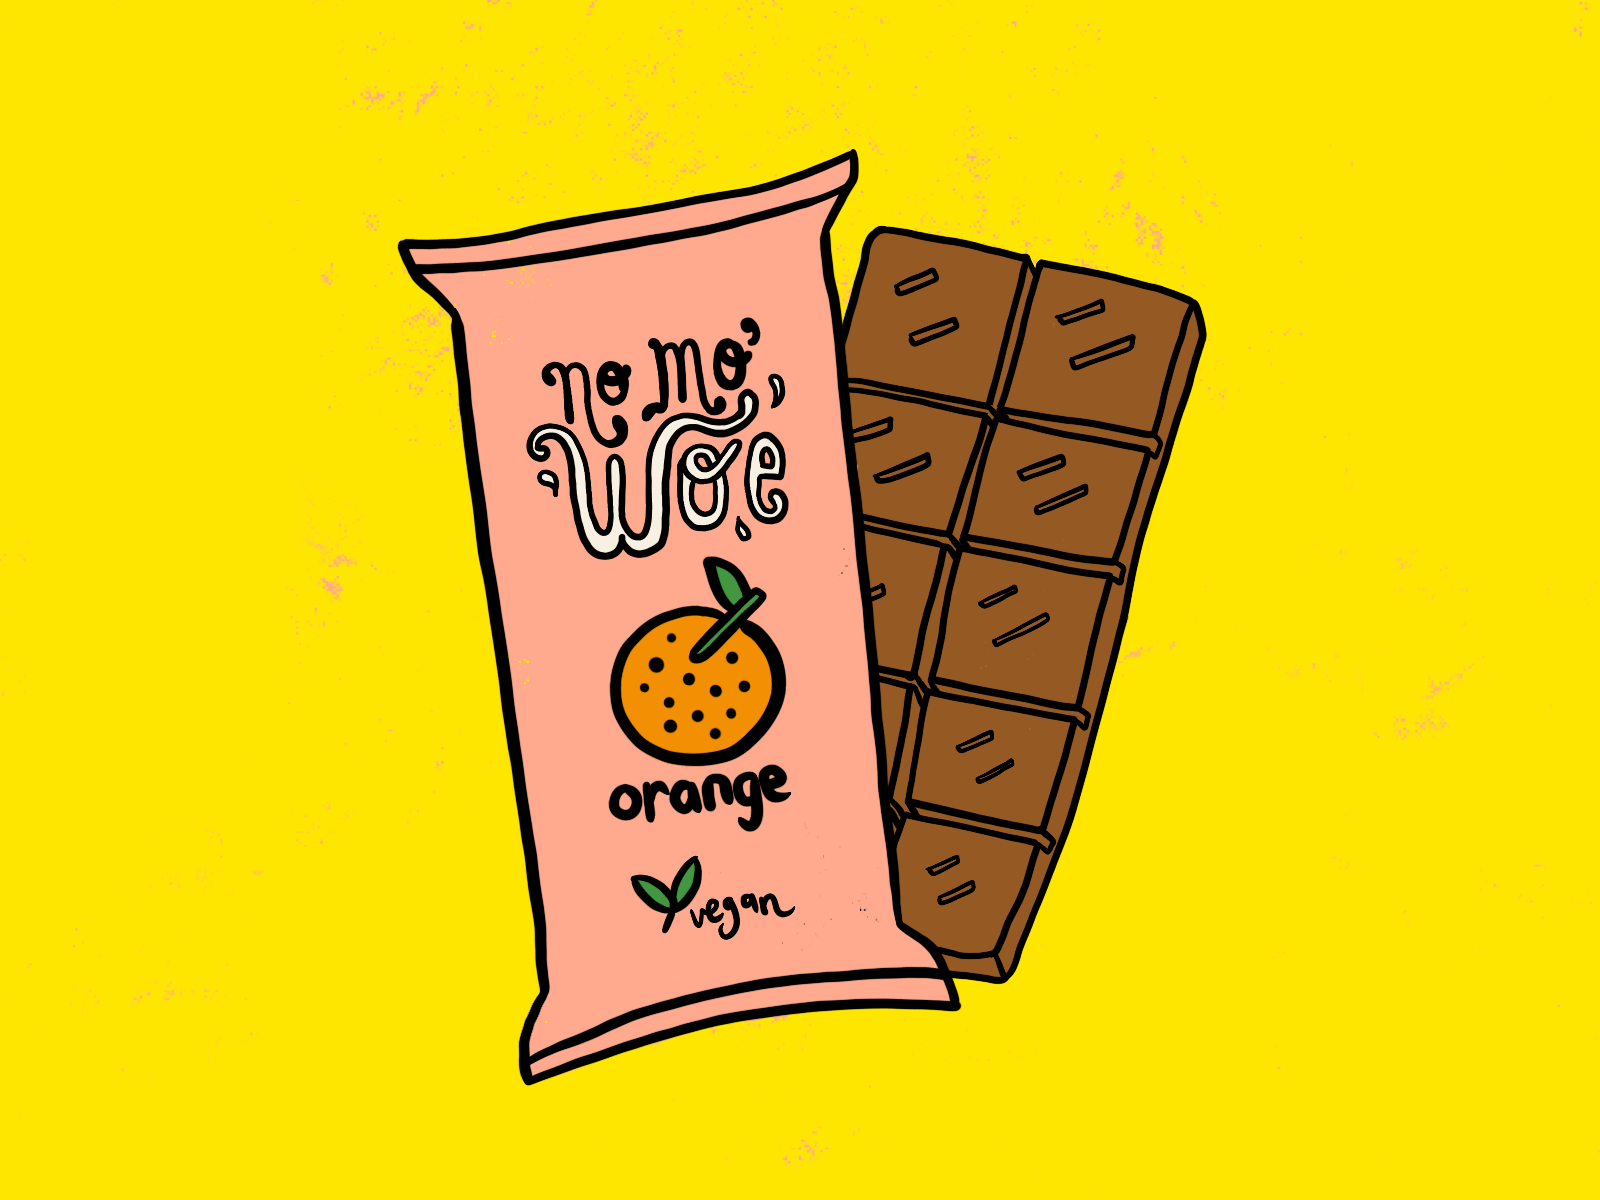 Woe Free Chocolate 2d 2d animation animation branding chocolate chocolate illustration chocolate packaging design gif good vibes happy illustration illustrator logo mental health mental health awareness packaging packaging design typography yellow